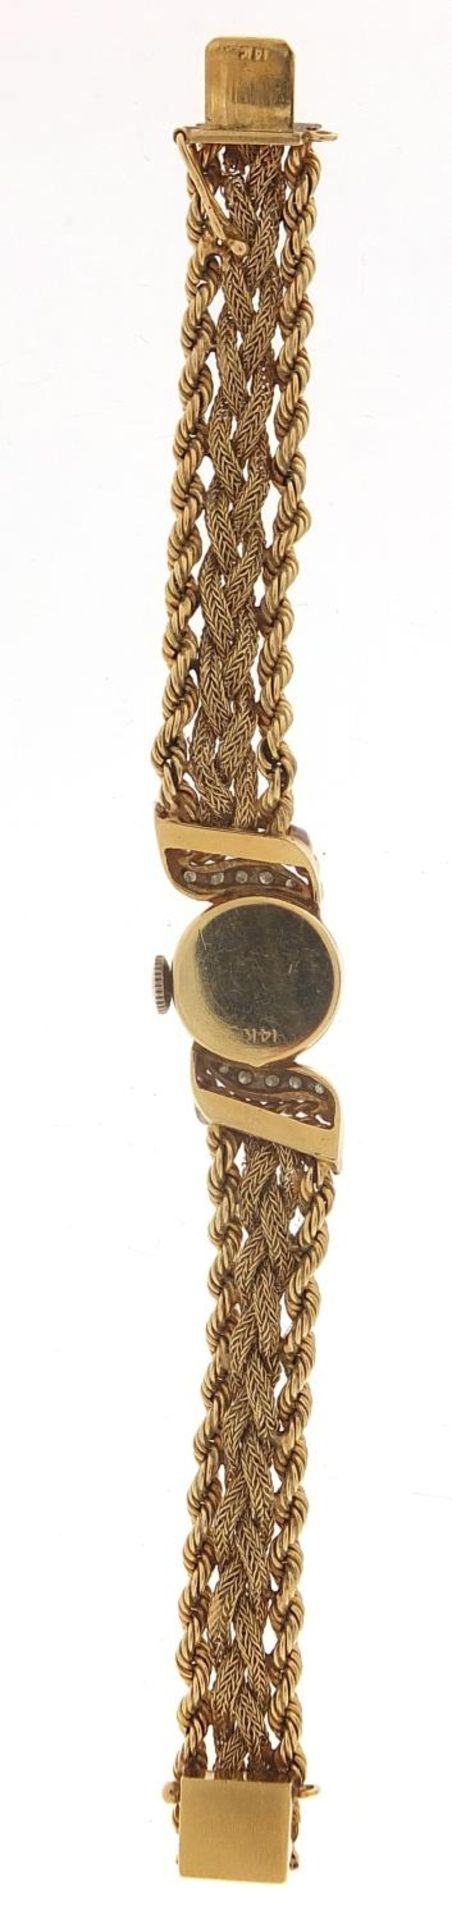 Le Courier, ladies 14ct gold and diamond manual wind wristwatch with 14ct gold rope twist strap, - Image 4 of 7